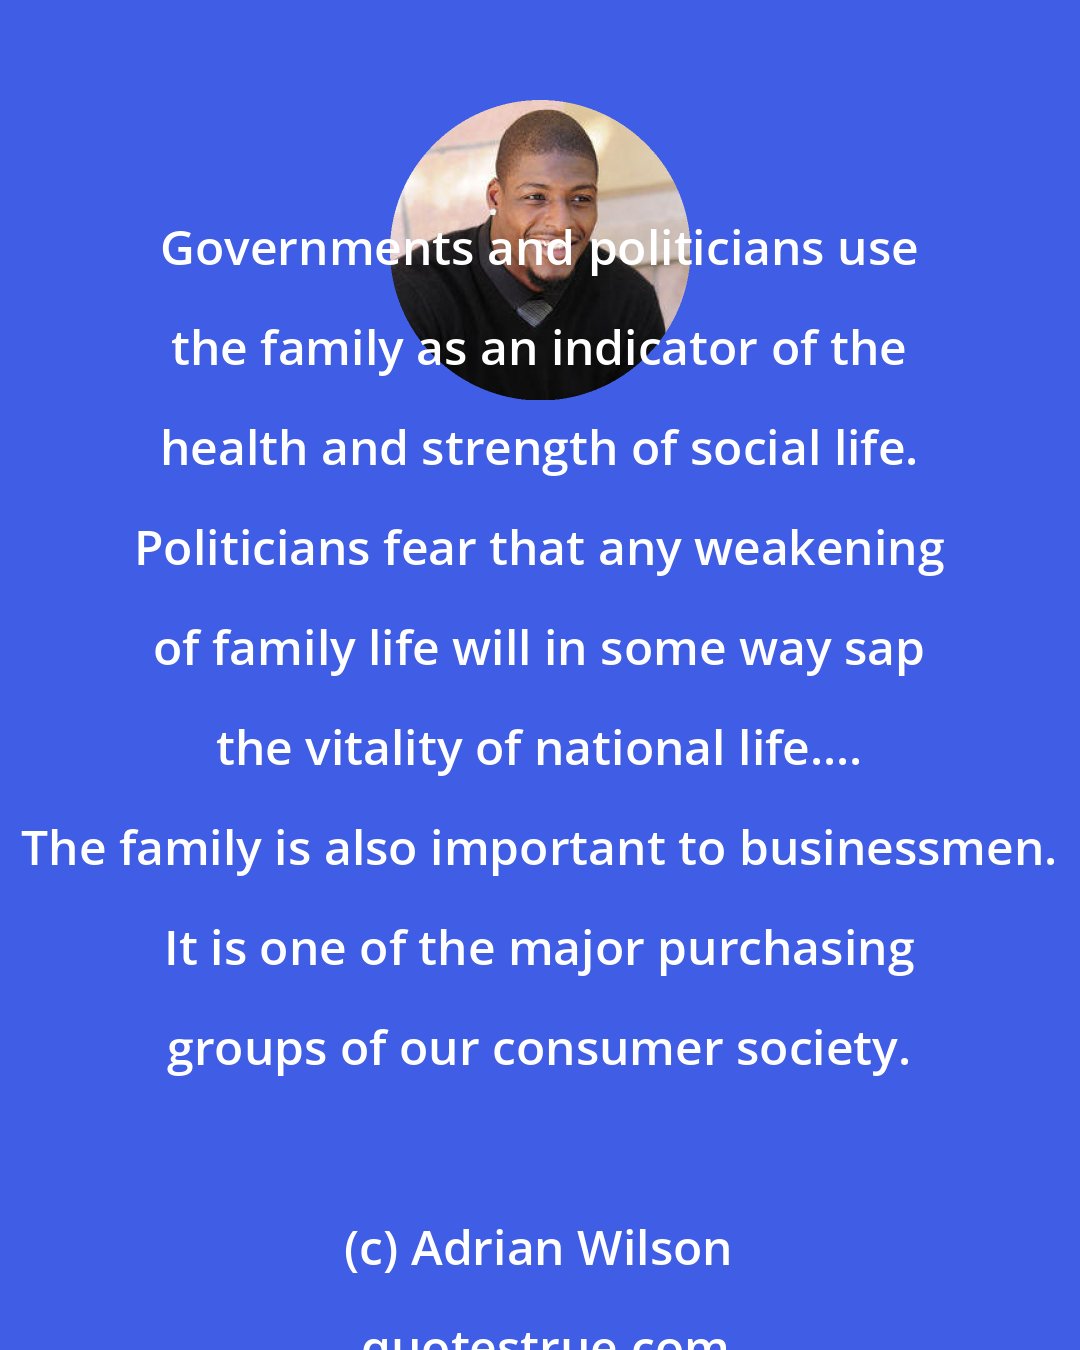 Adrian Wilson: Governments and politicians use the family as an indicator of the health and strength of social life. Politicians fear that any weakening of family life will in some way sap the vitality of national life.... The family is also important to businessmen. It is one of the major purchasing groups of our consumer society.